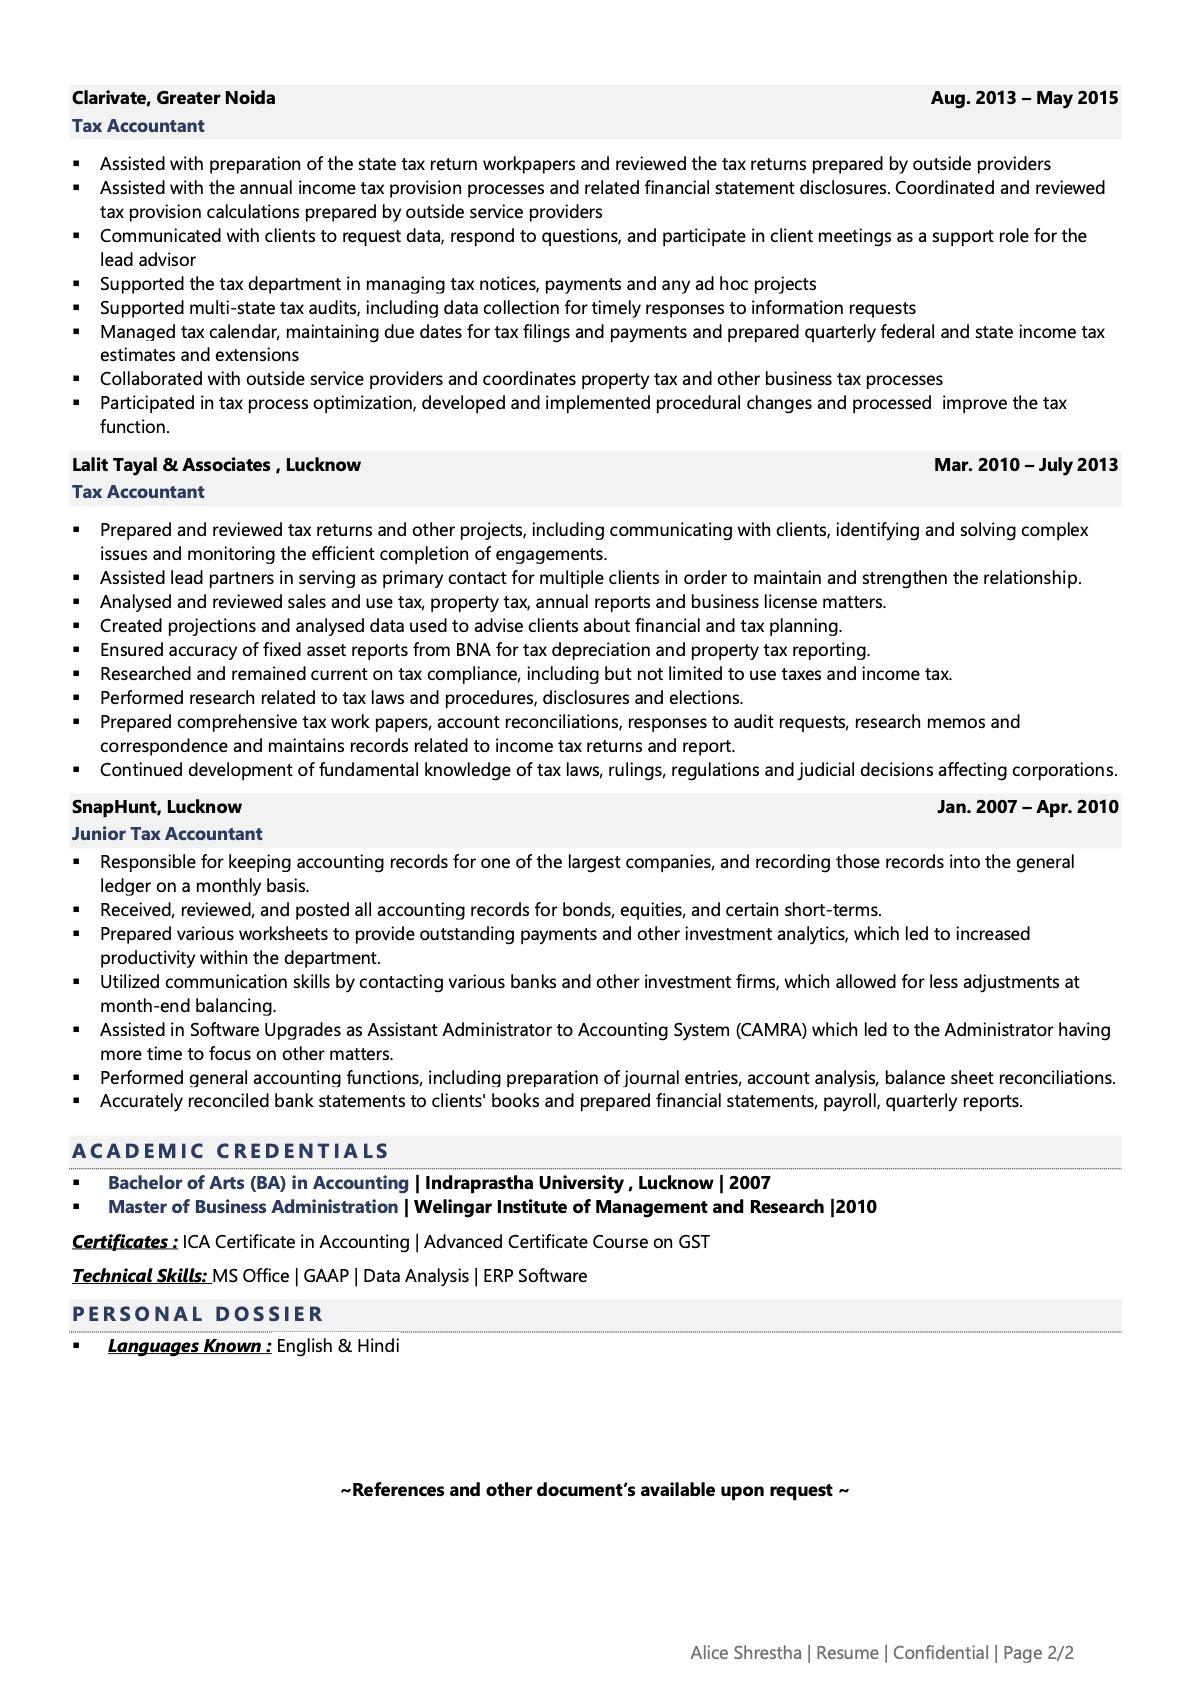 Tax Accountant - Resume Example & Template